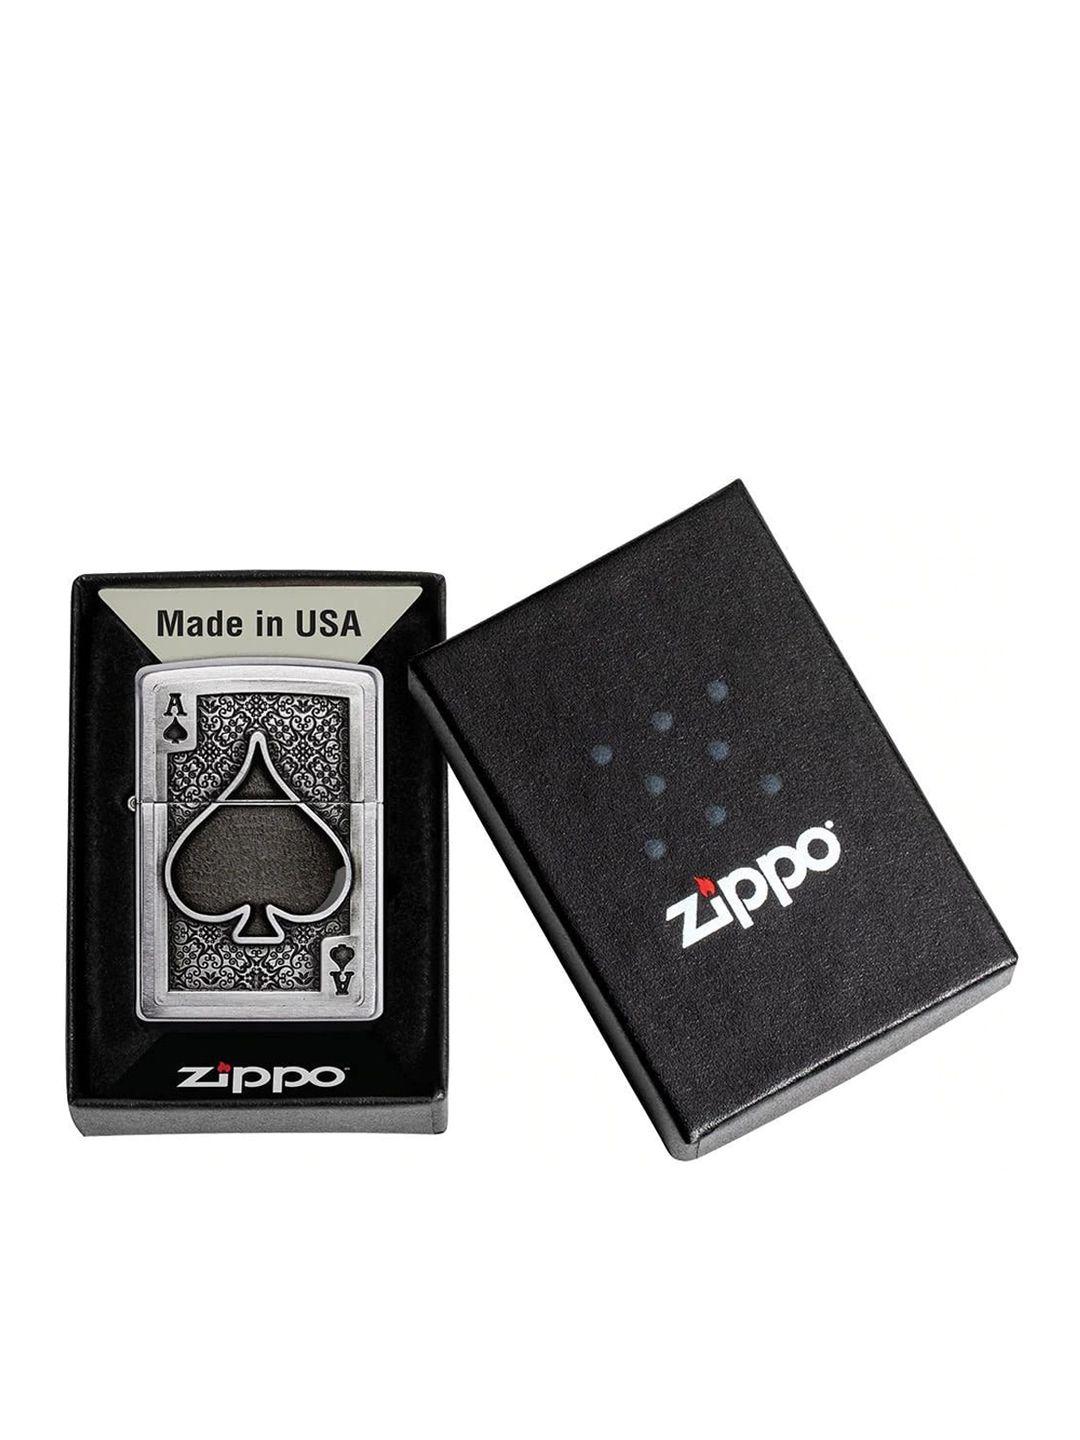 zippo unisex silver-toned printed pocket windproof lighter